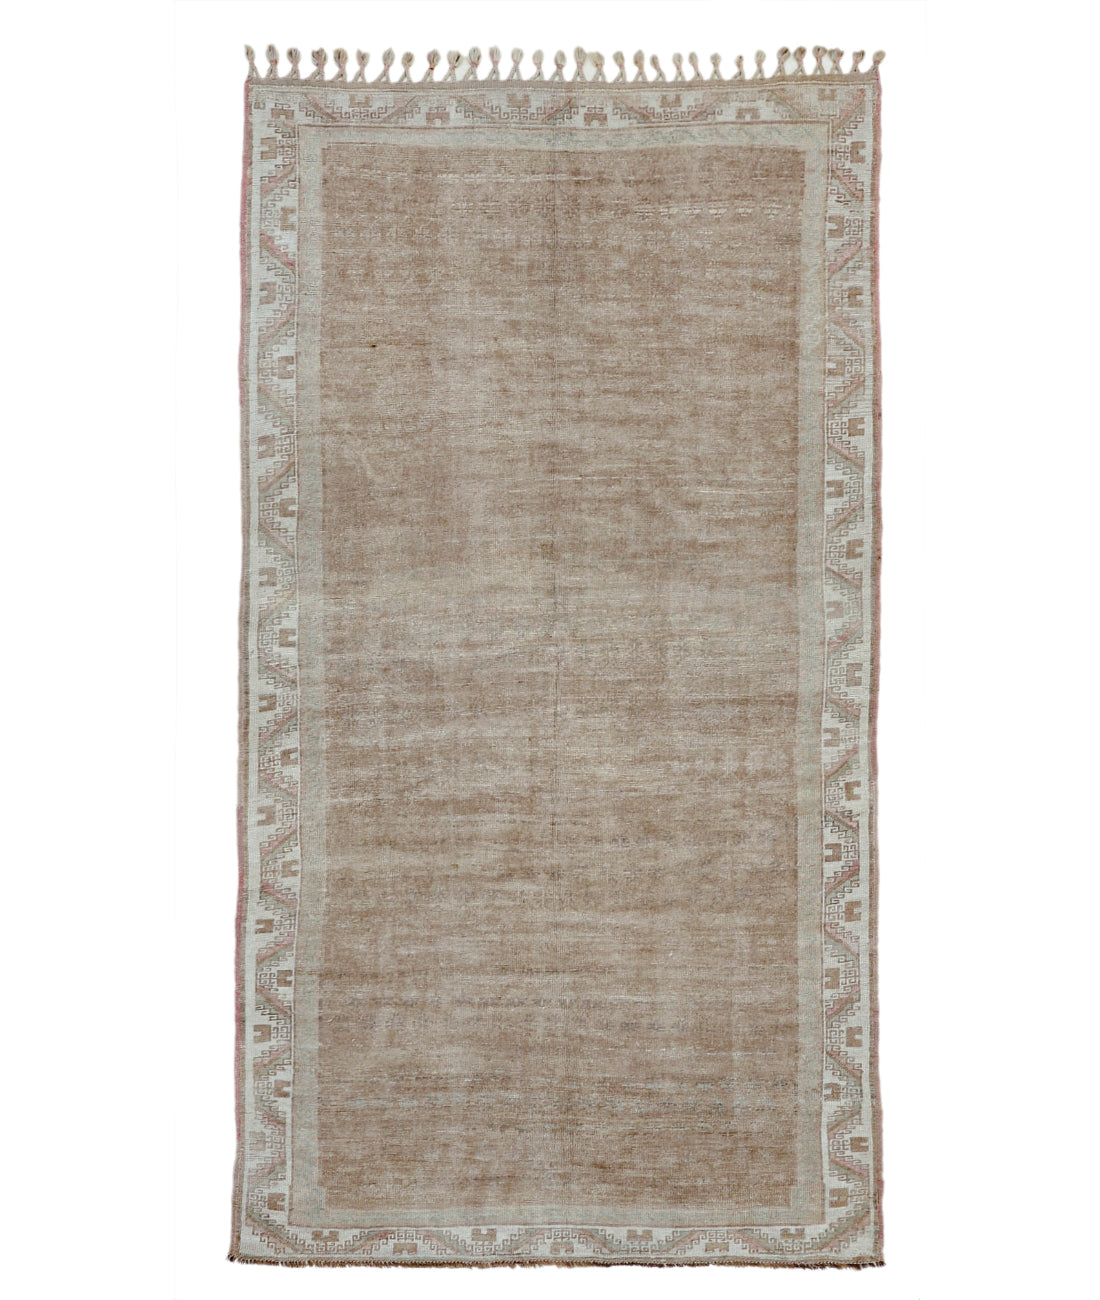 Hand Knotted Turkey Kars Wool Rug 5'9" x 10'8" 5' 9" X 10' 8" (175 X 325) / Taupe / Ivory